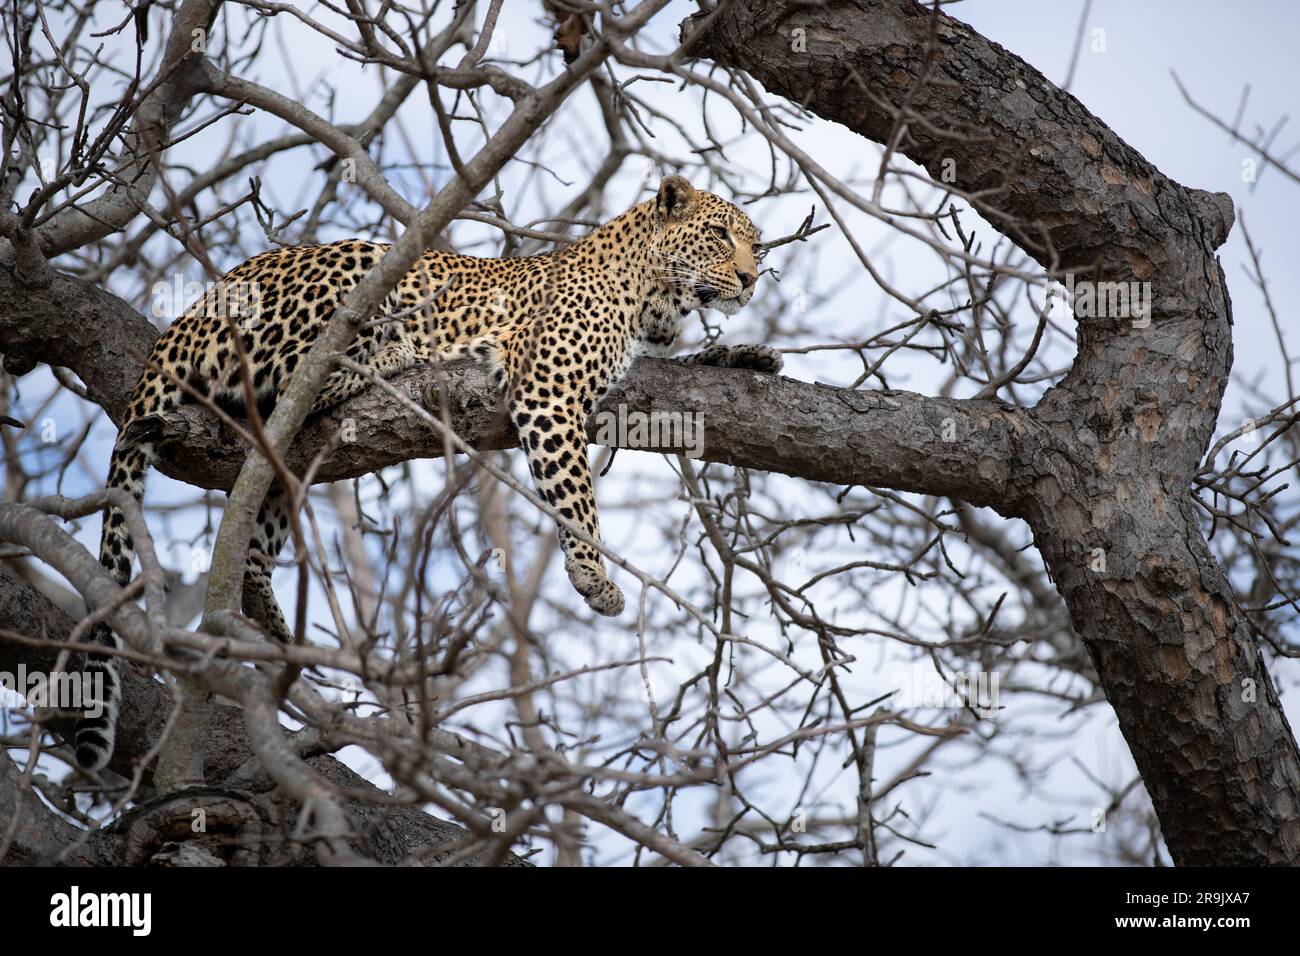 A leopard, Panthera pardus, lying up in a tree. Stock Photo